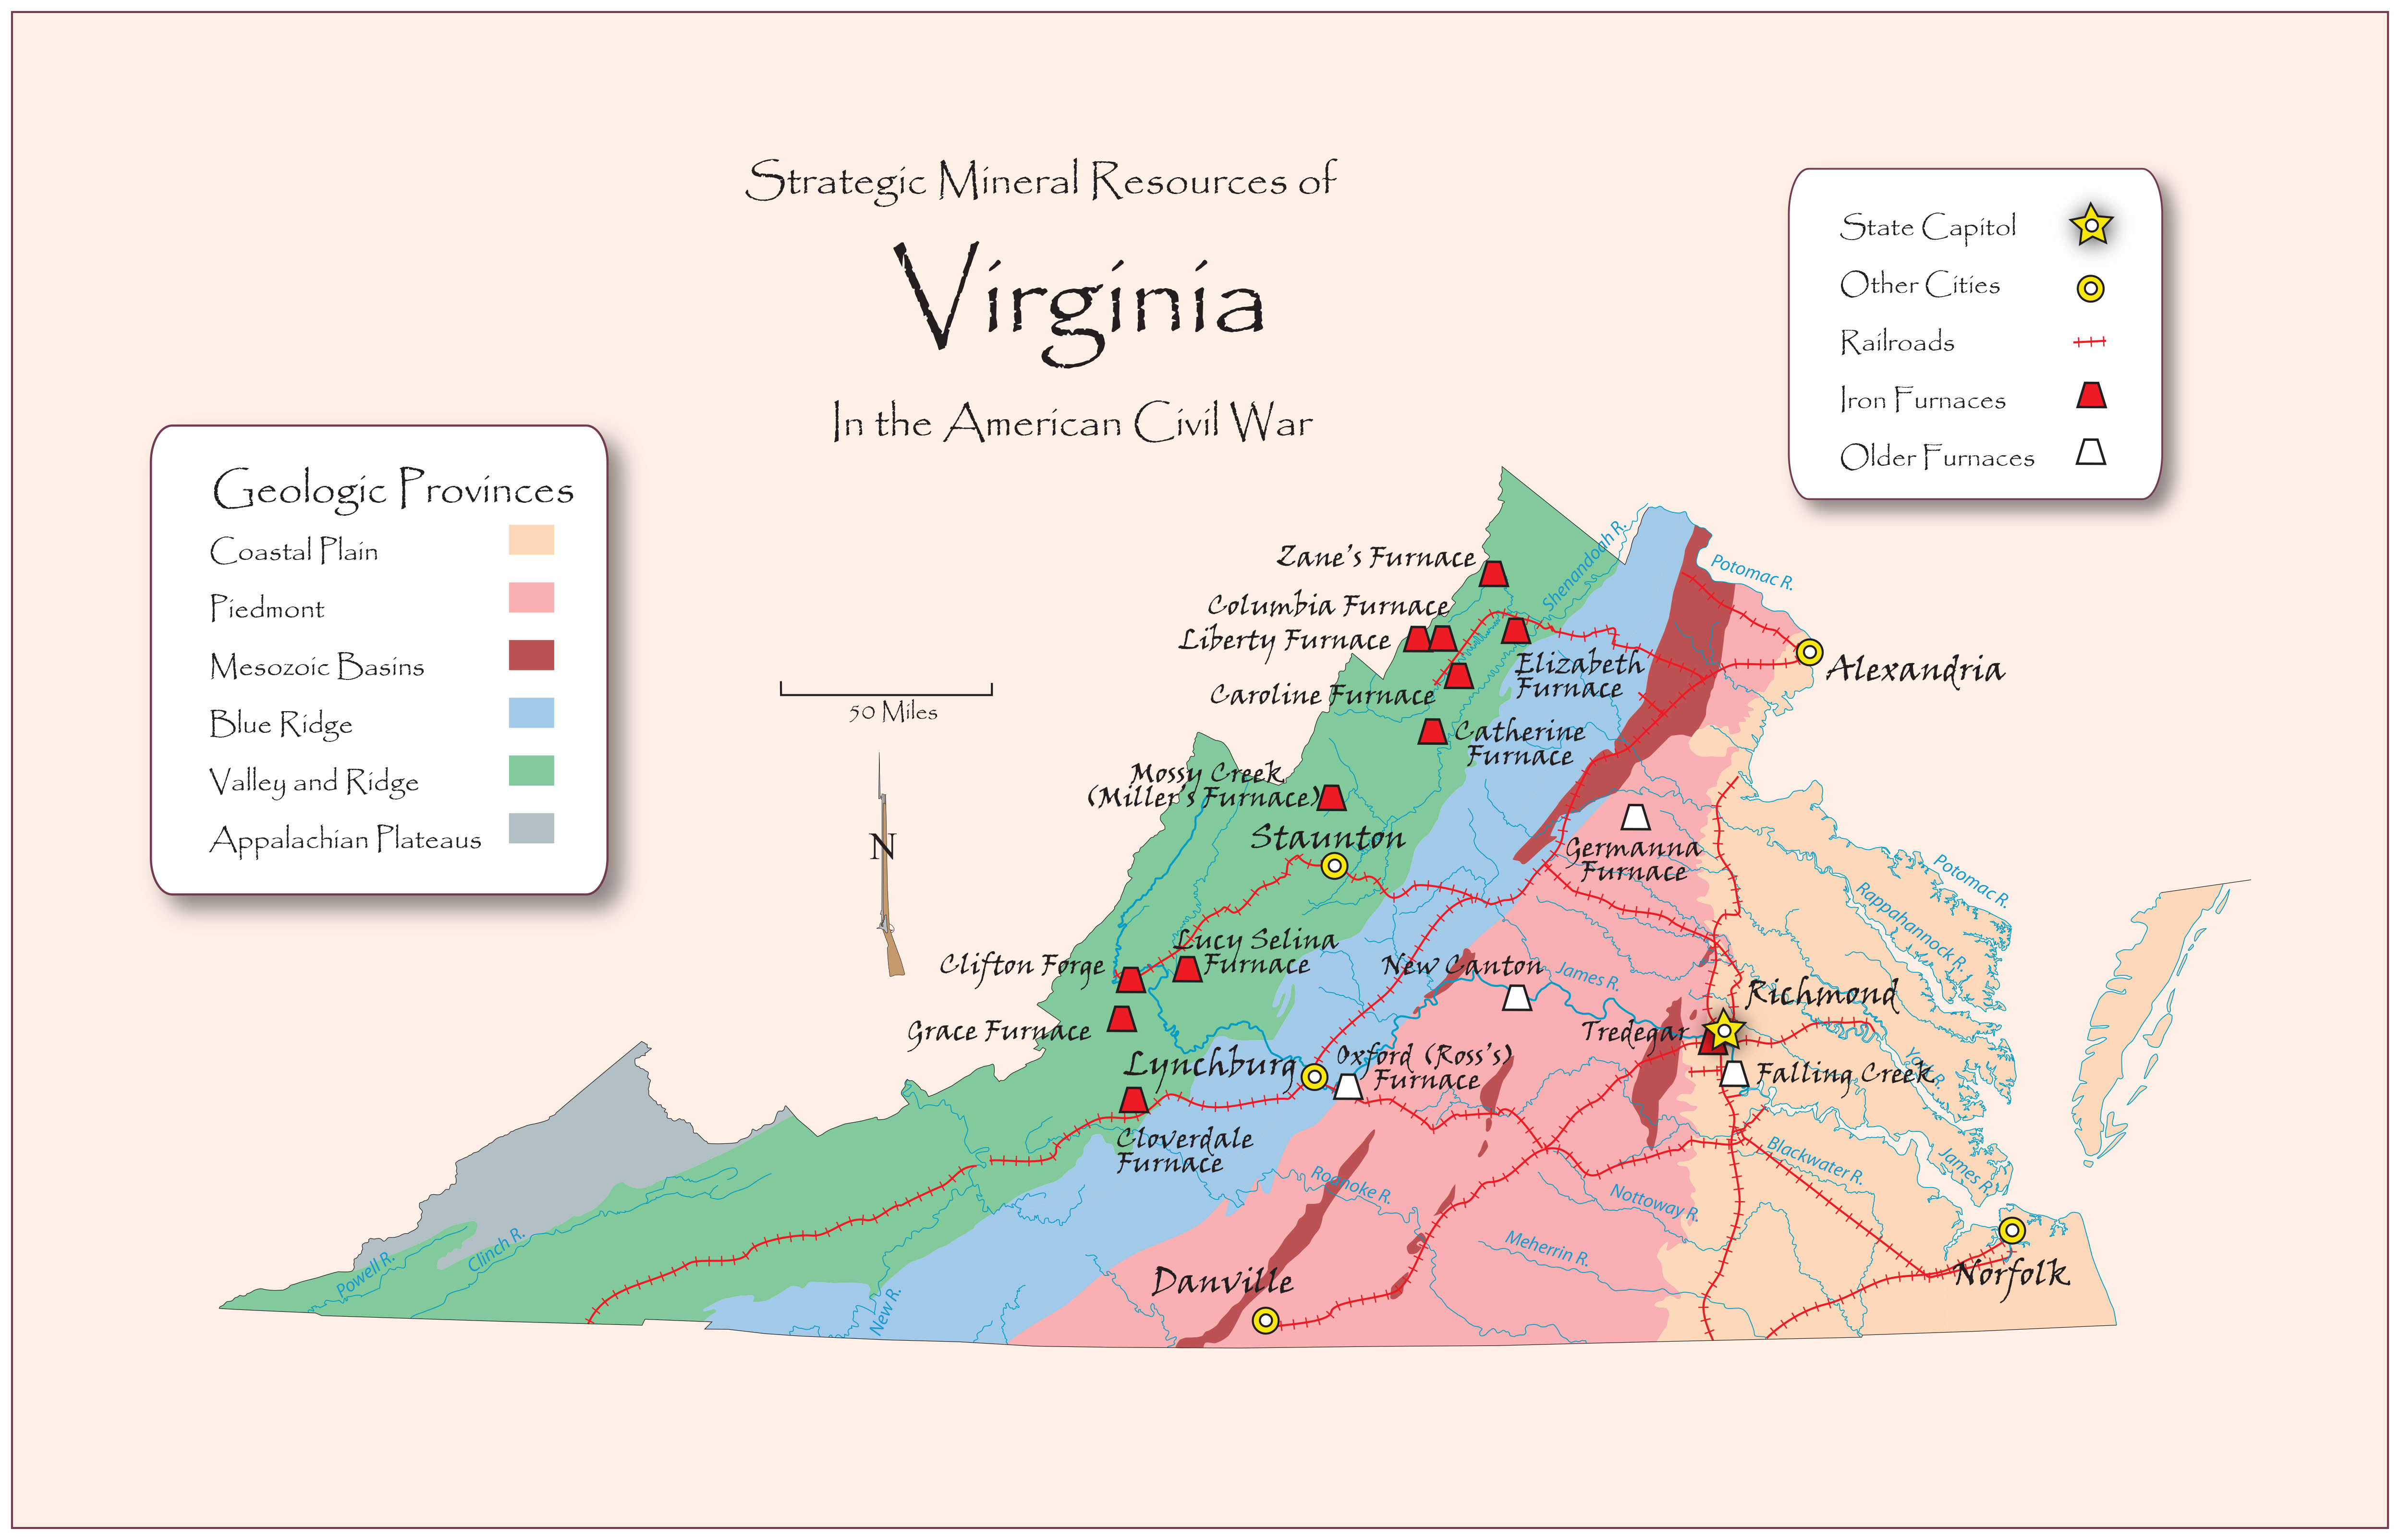 Strategic Mineral Resources of Virginia in the American Civil War - Iron